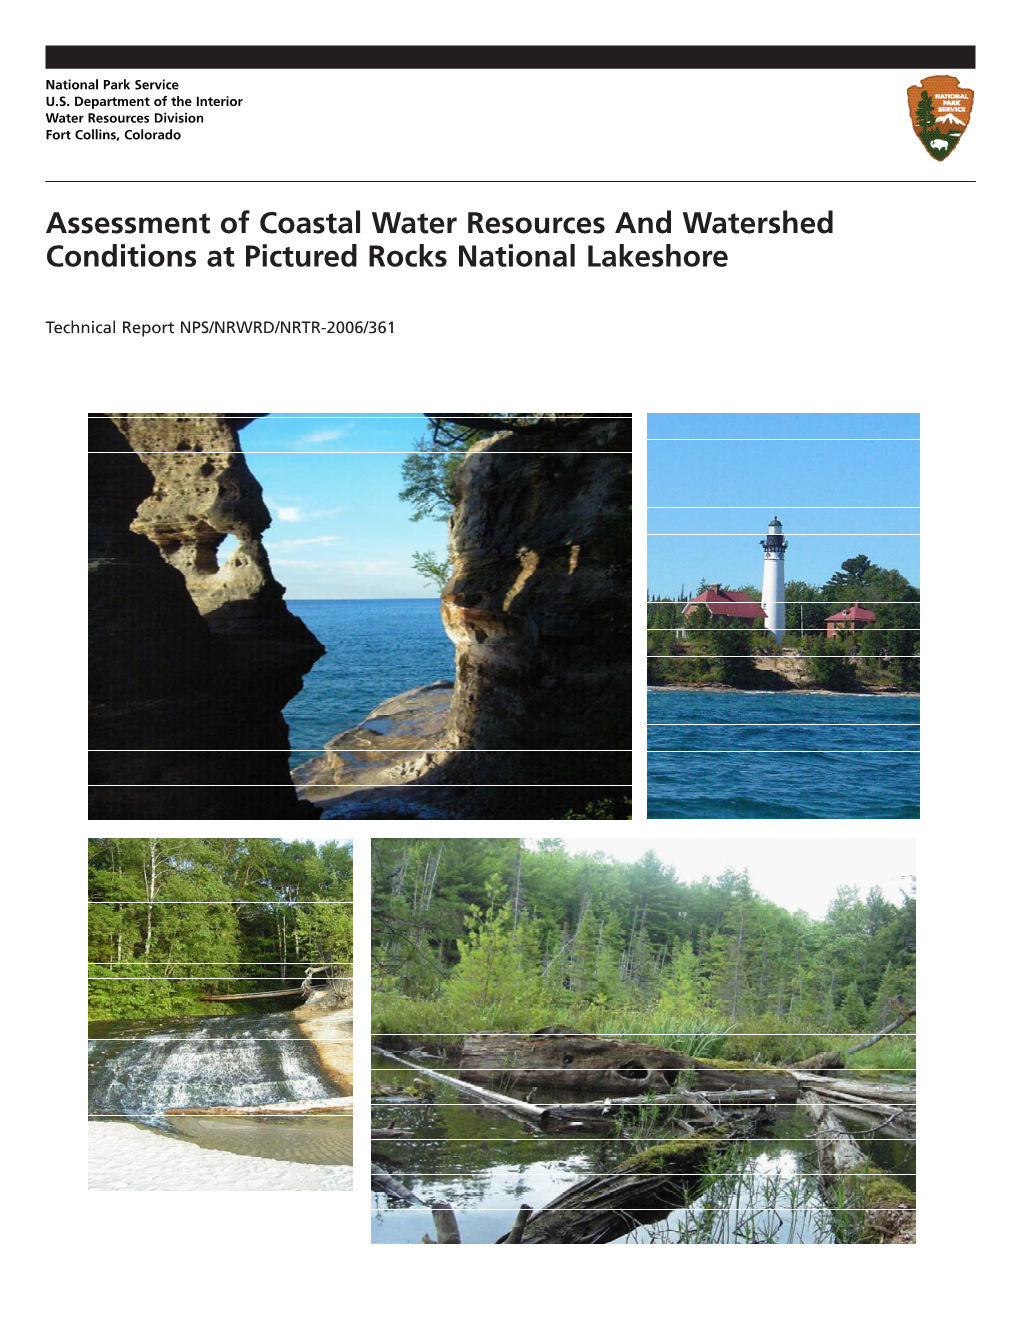 Assessment of Coastal Water Resources and Watershed Conditions at Pictured Rocks National Lakeshore